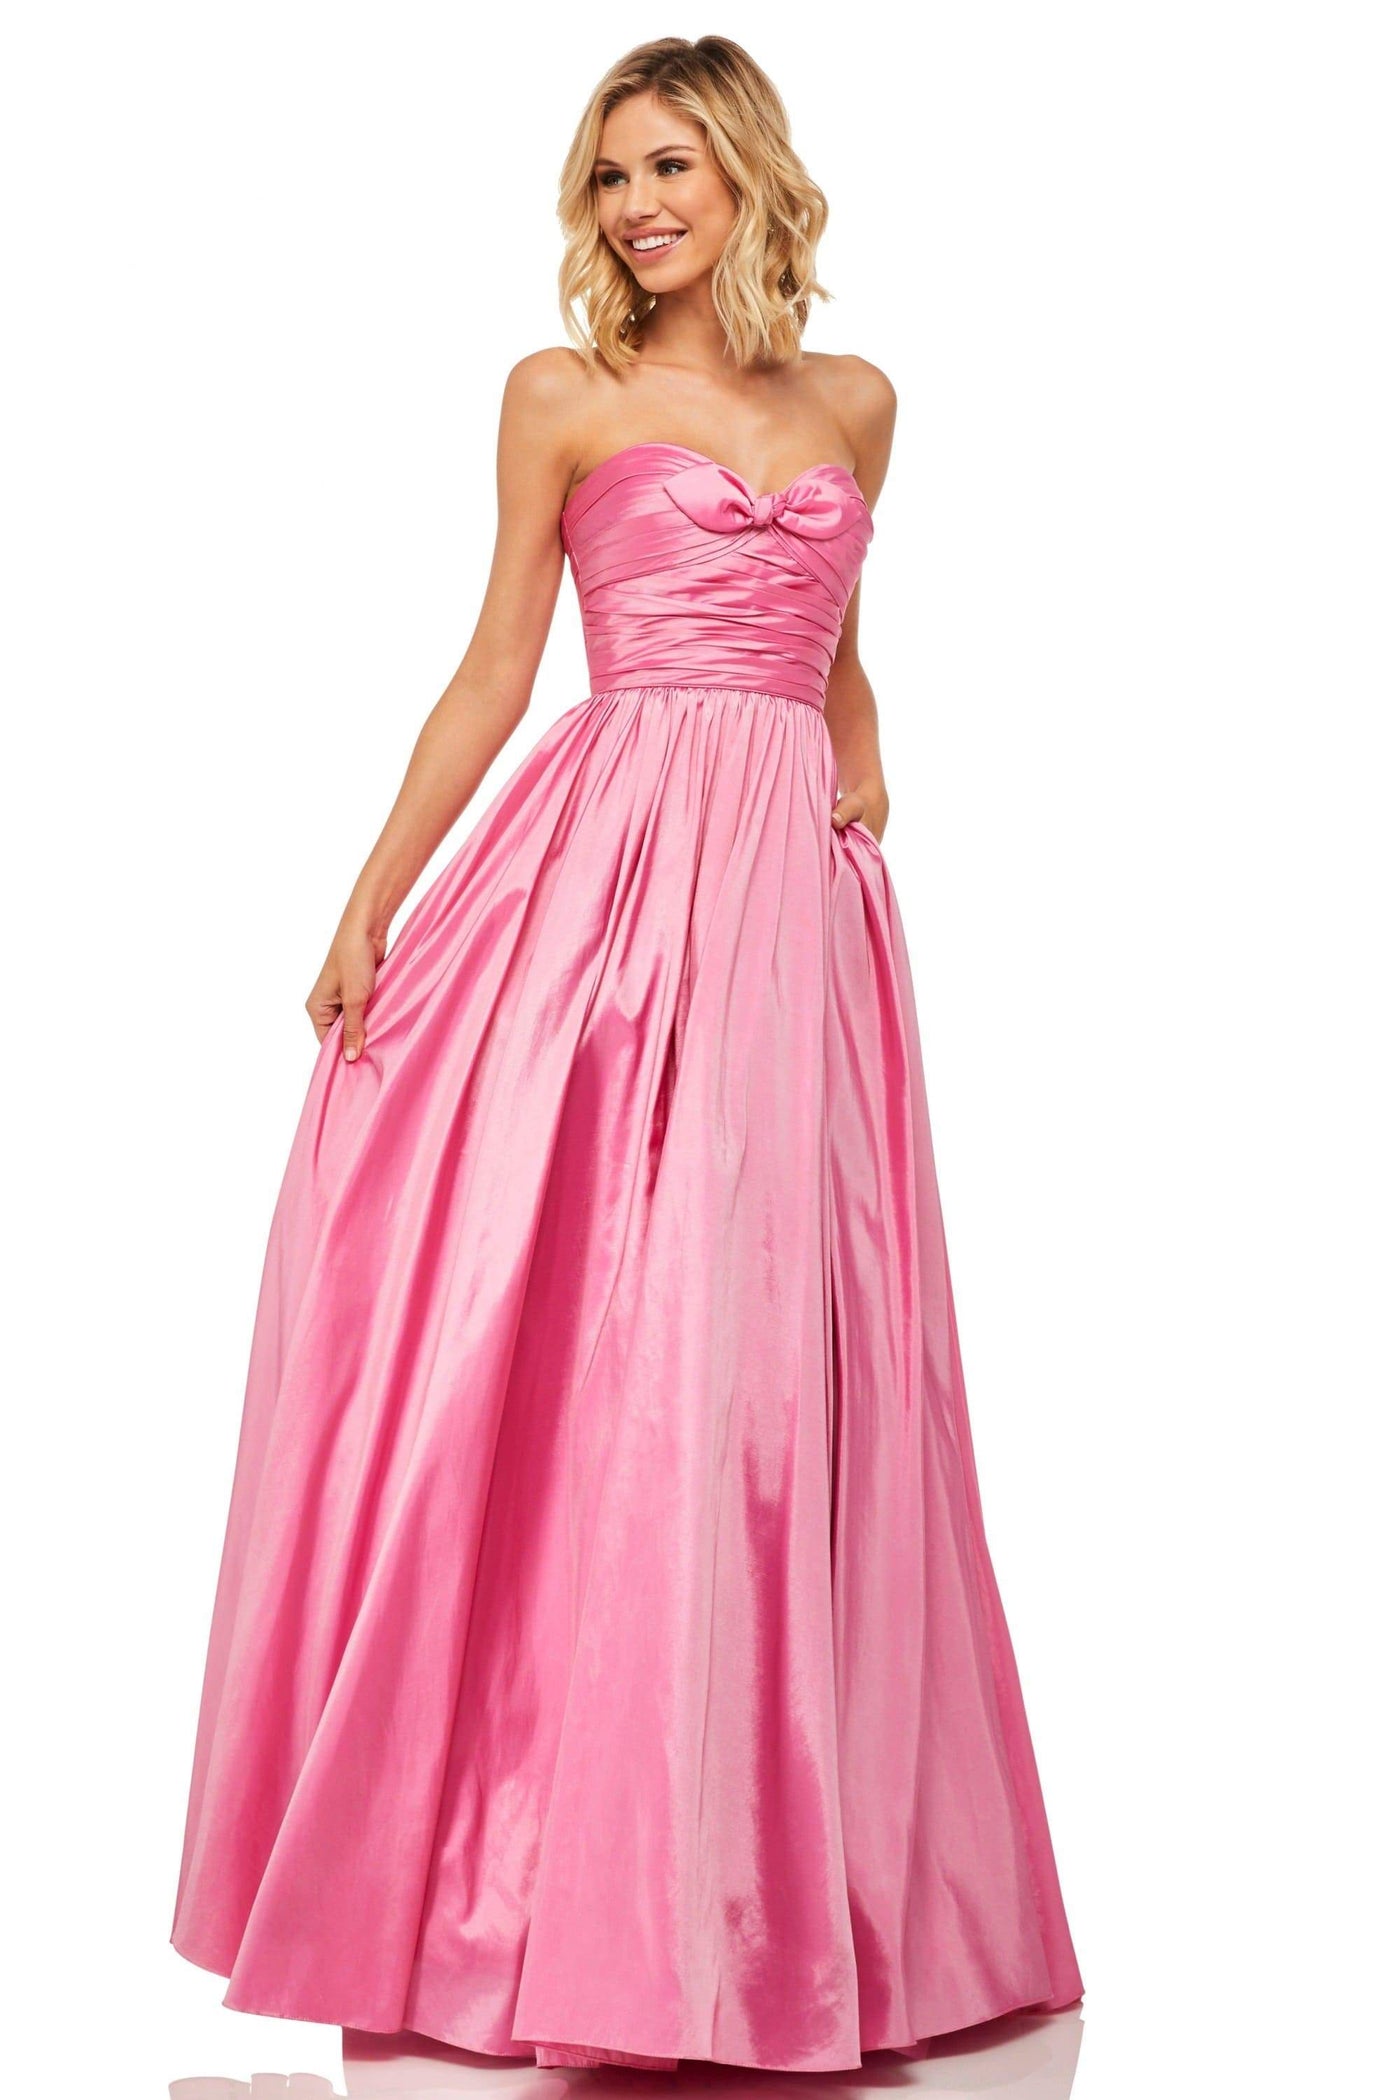 Sherri Hill - 52833 Sweetheart Bodice Ruched Taffeta Long Gown Prom Dresses 00 / Bright Pink